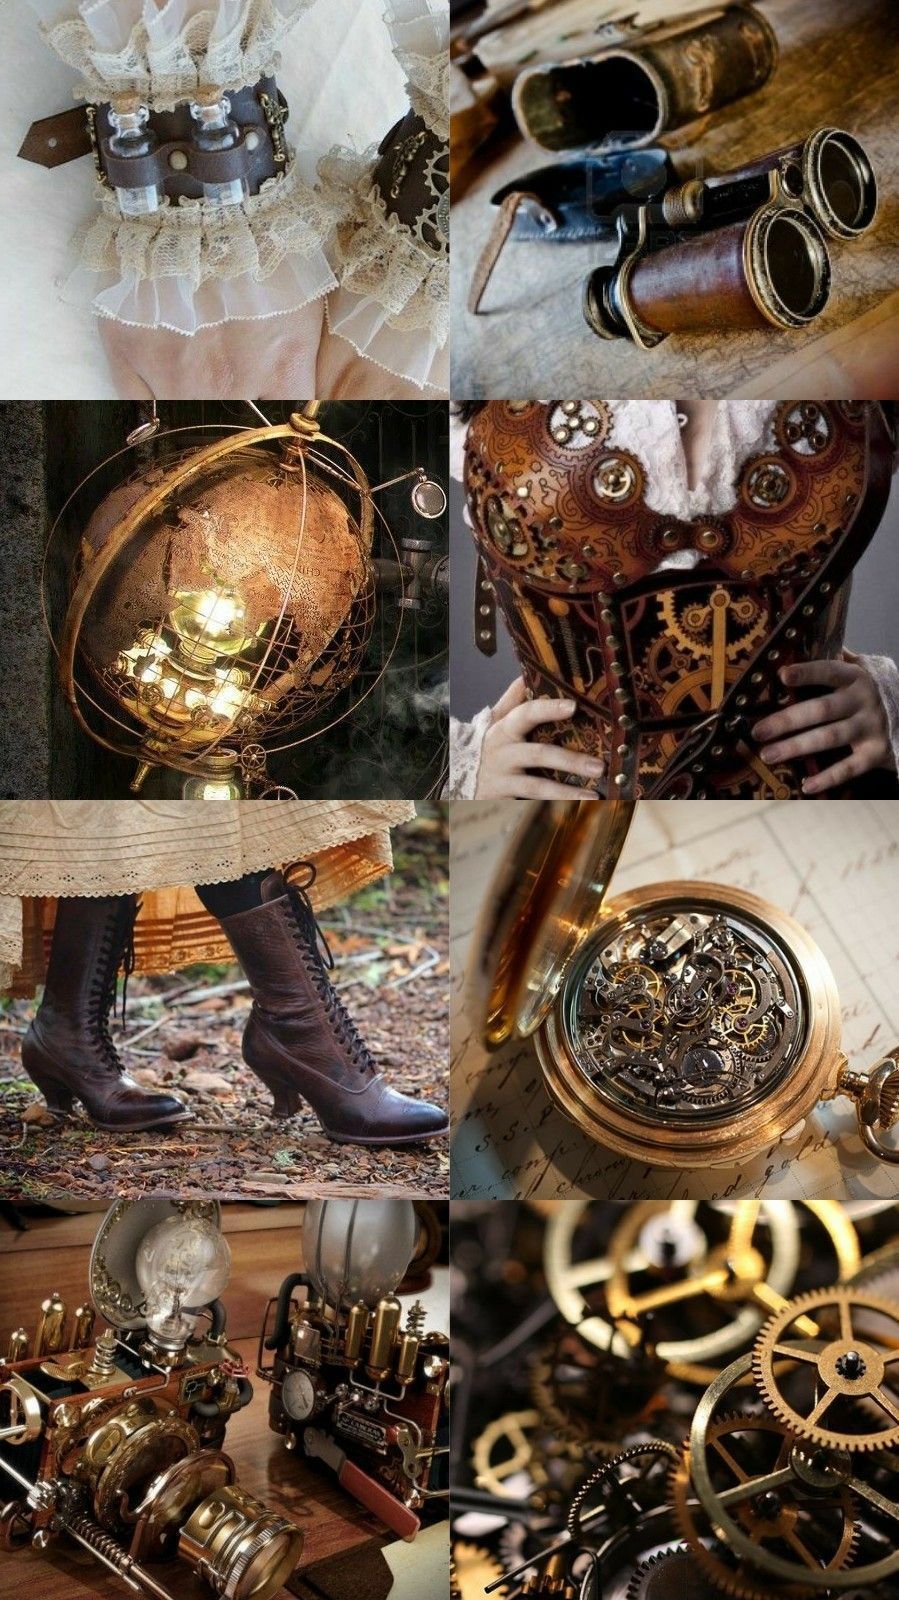 A collage of images of various steam punk elements including a corset, boots, and clocks. - Steampunk